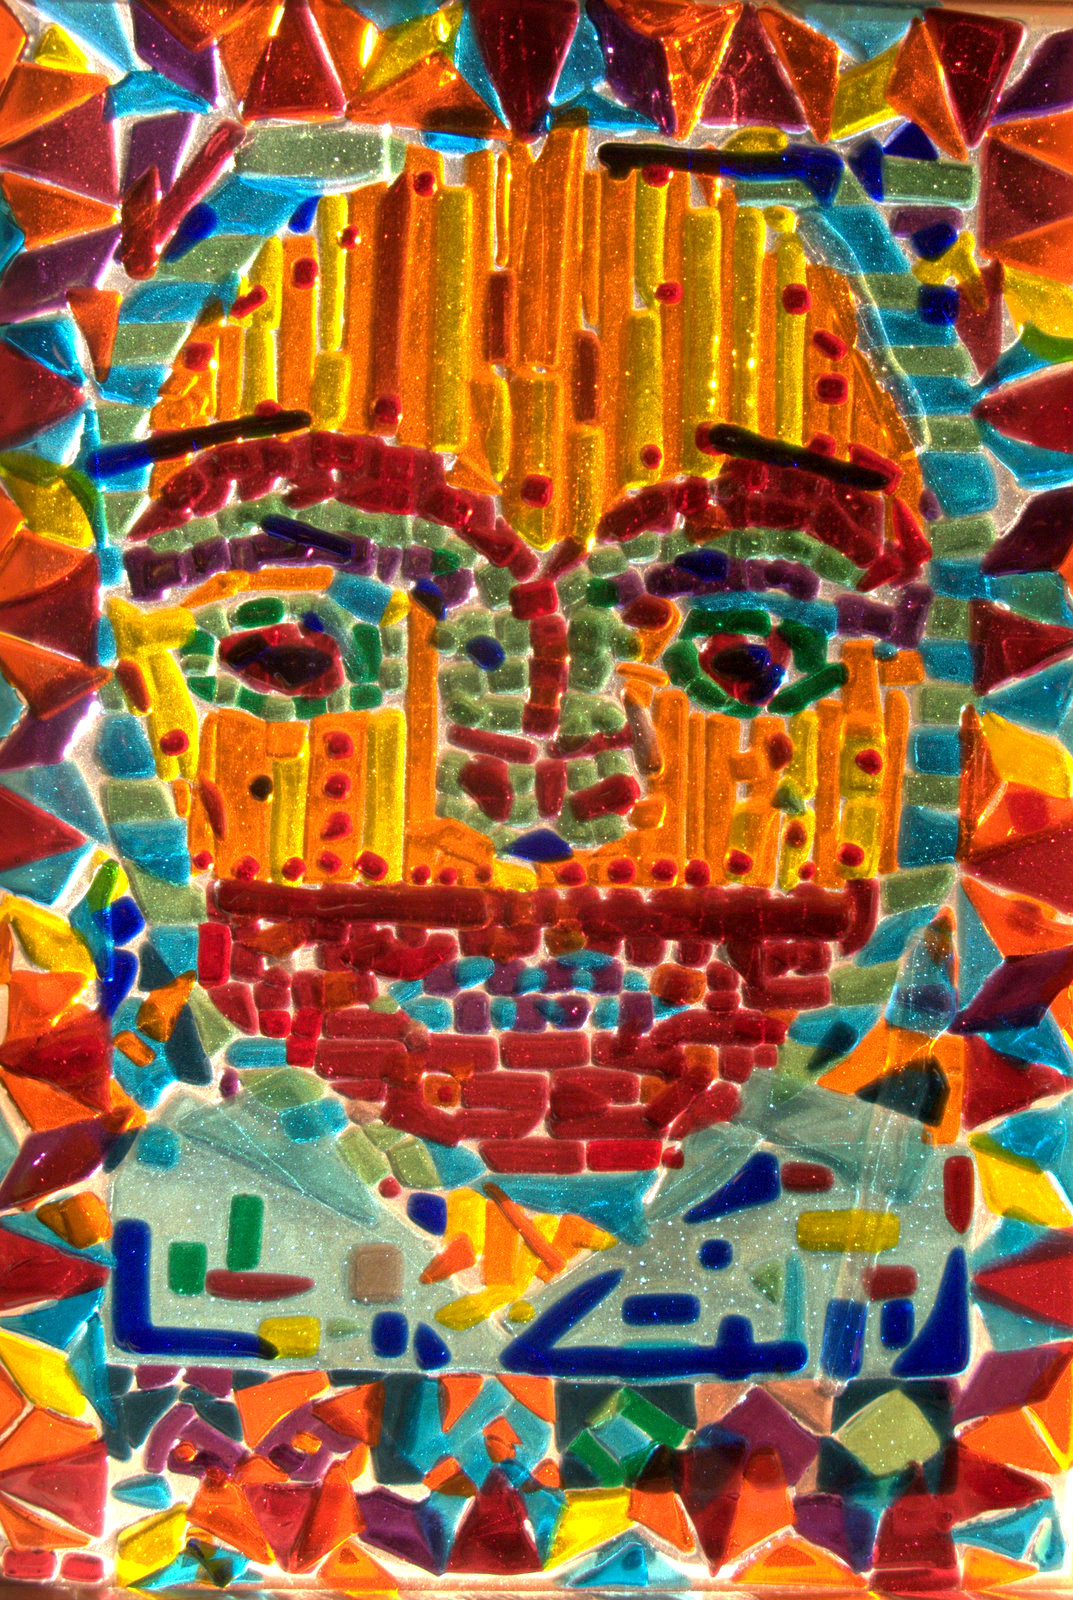  Inspired by an African mask. &nbsp; I had seen a photo of an African mask which I liked and thought I'd do something like it. &nbsp; I added my own patterns ont he edge.  2010  Fused glass. 